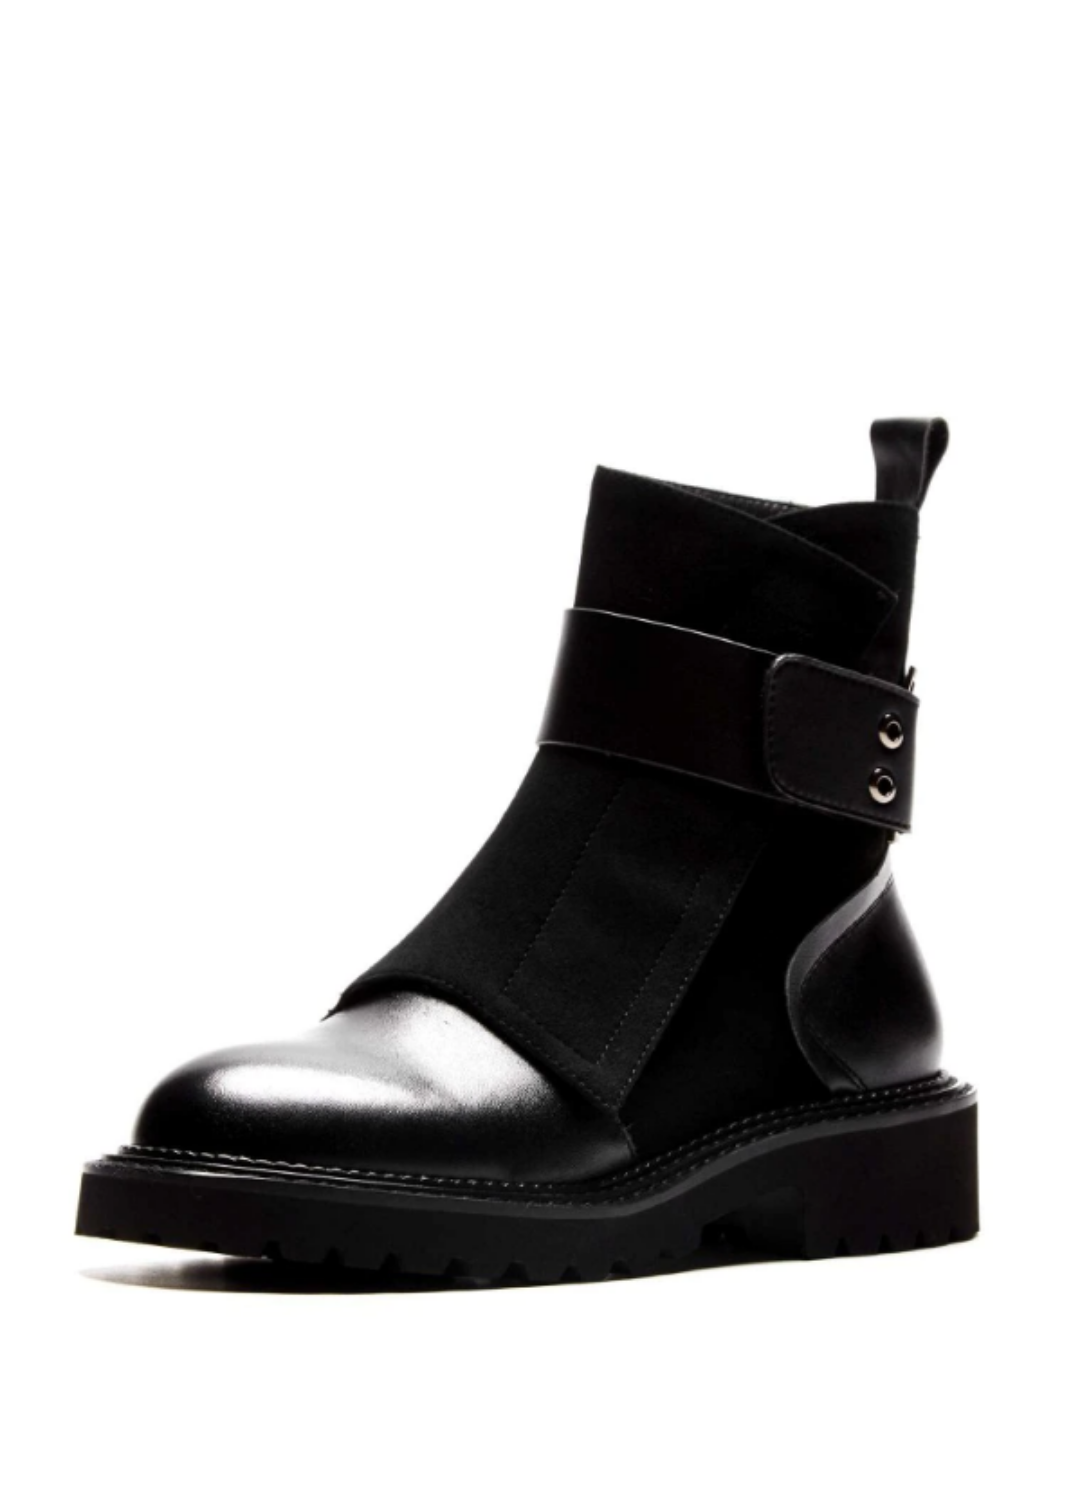 Parbela Women's Leather Boots